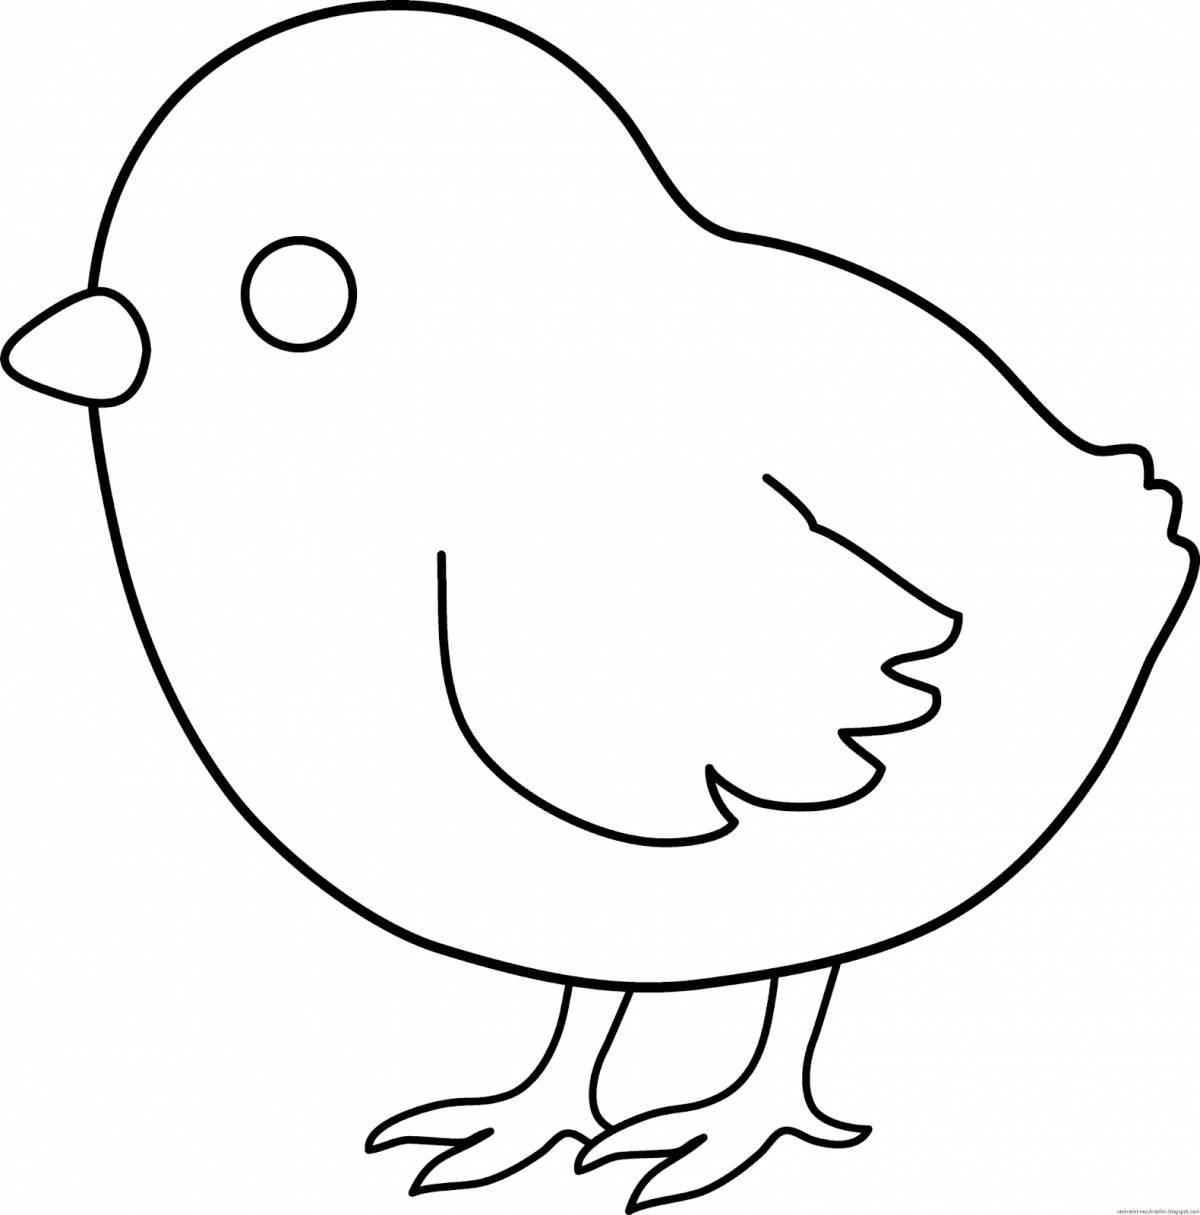 Funny chick drawing for kids